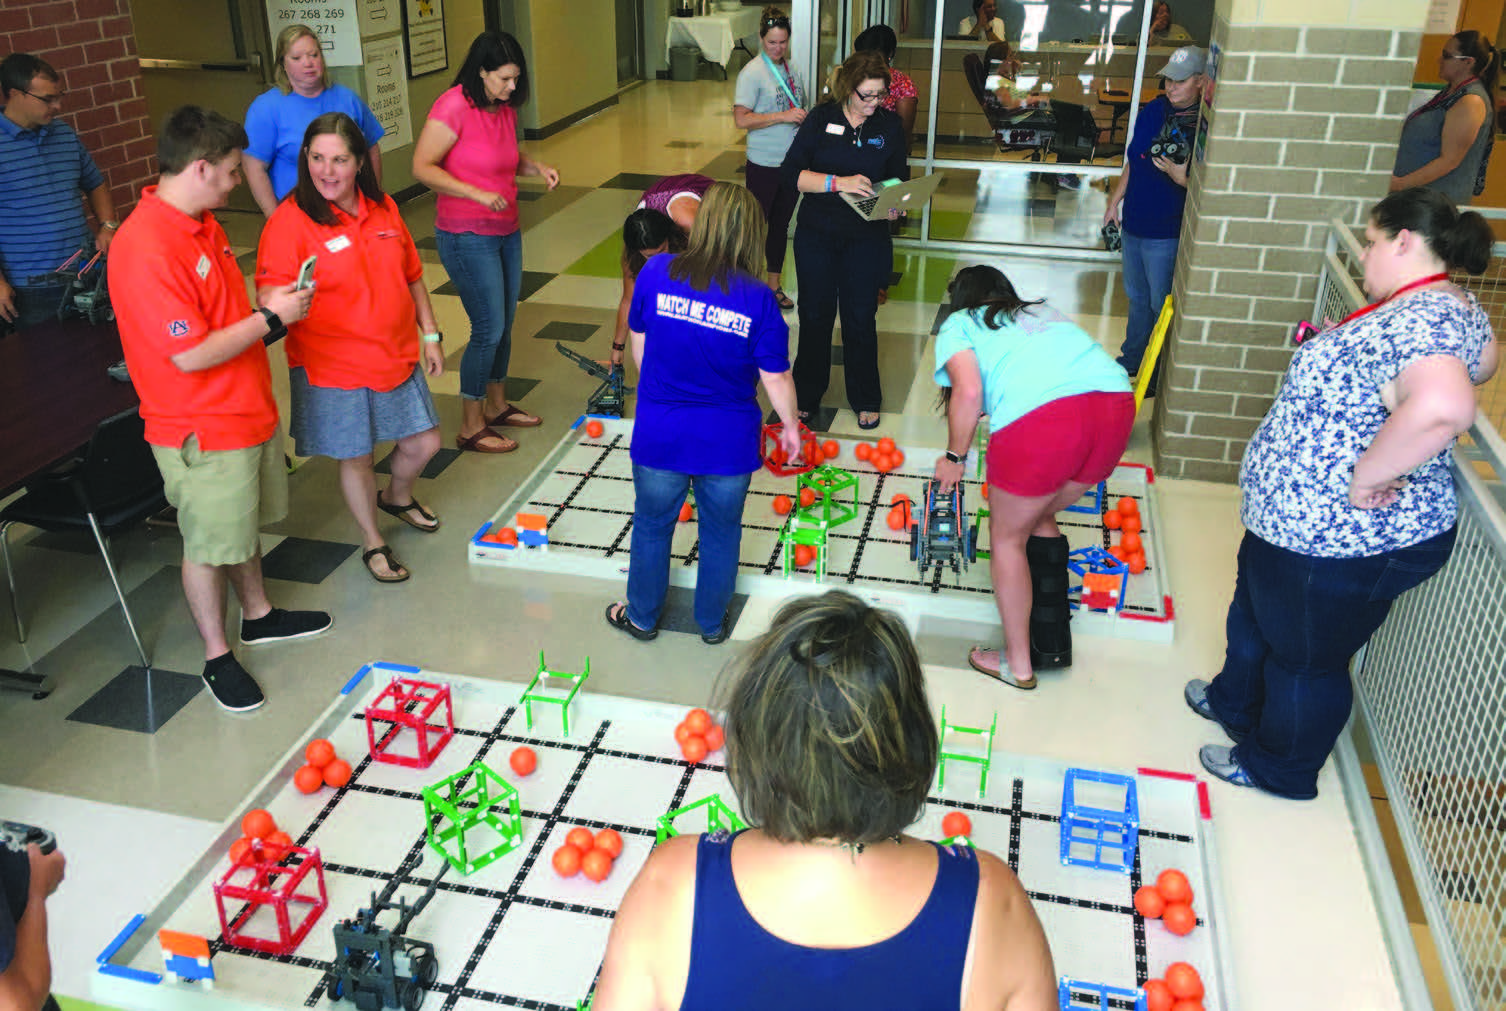 Group of people playing game with objects on tiled floor